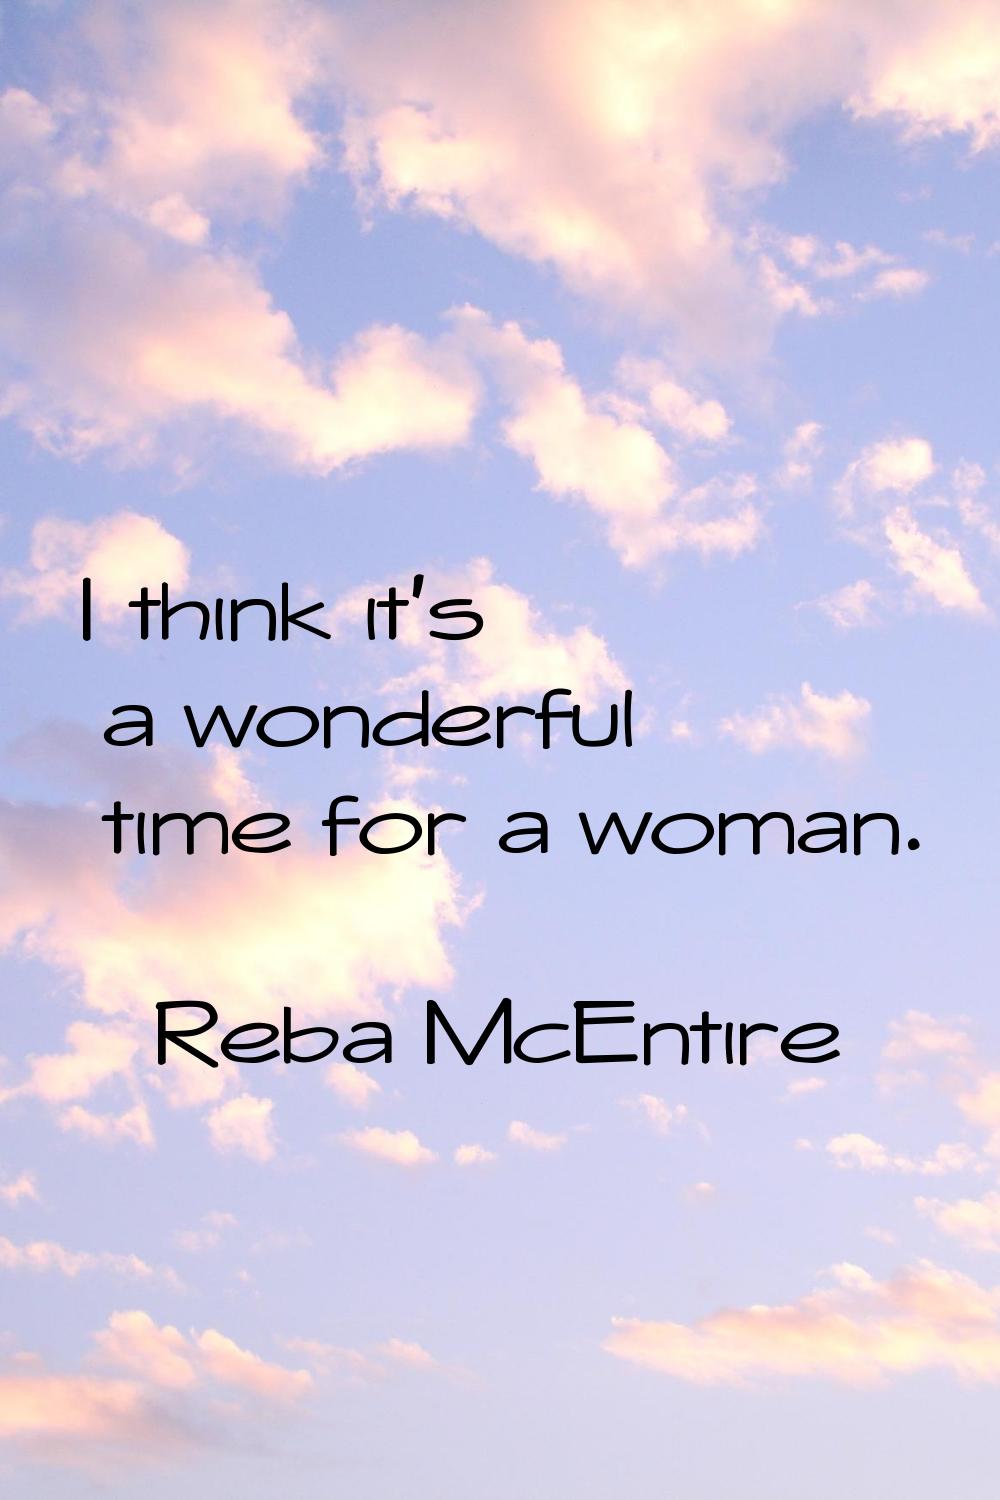 I think it's a wonderful time for a woman.